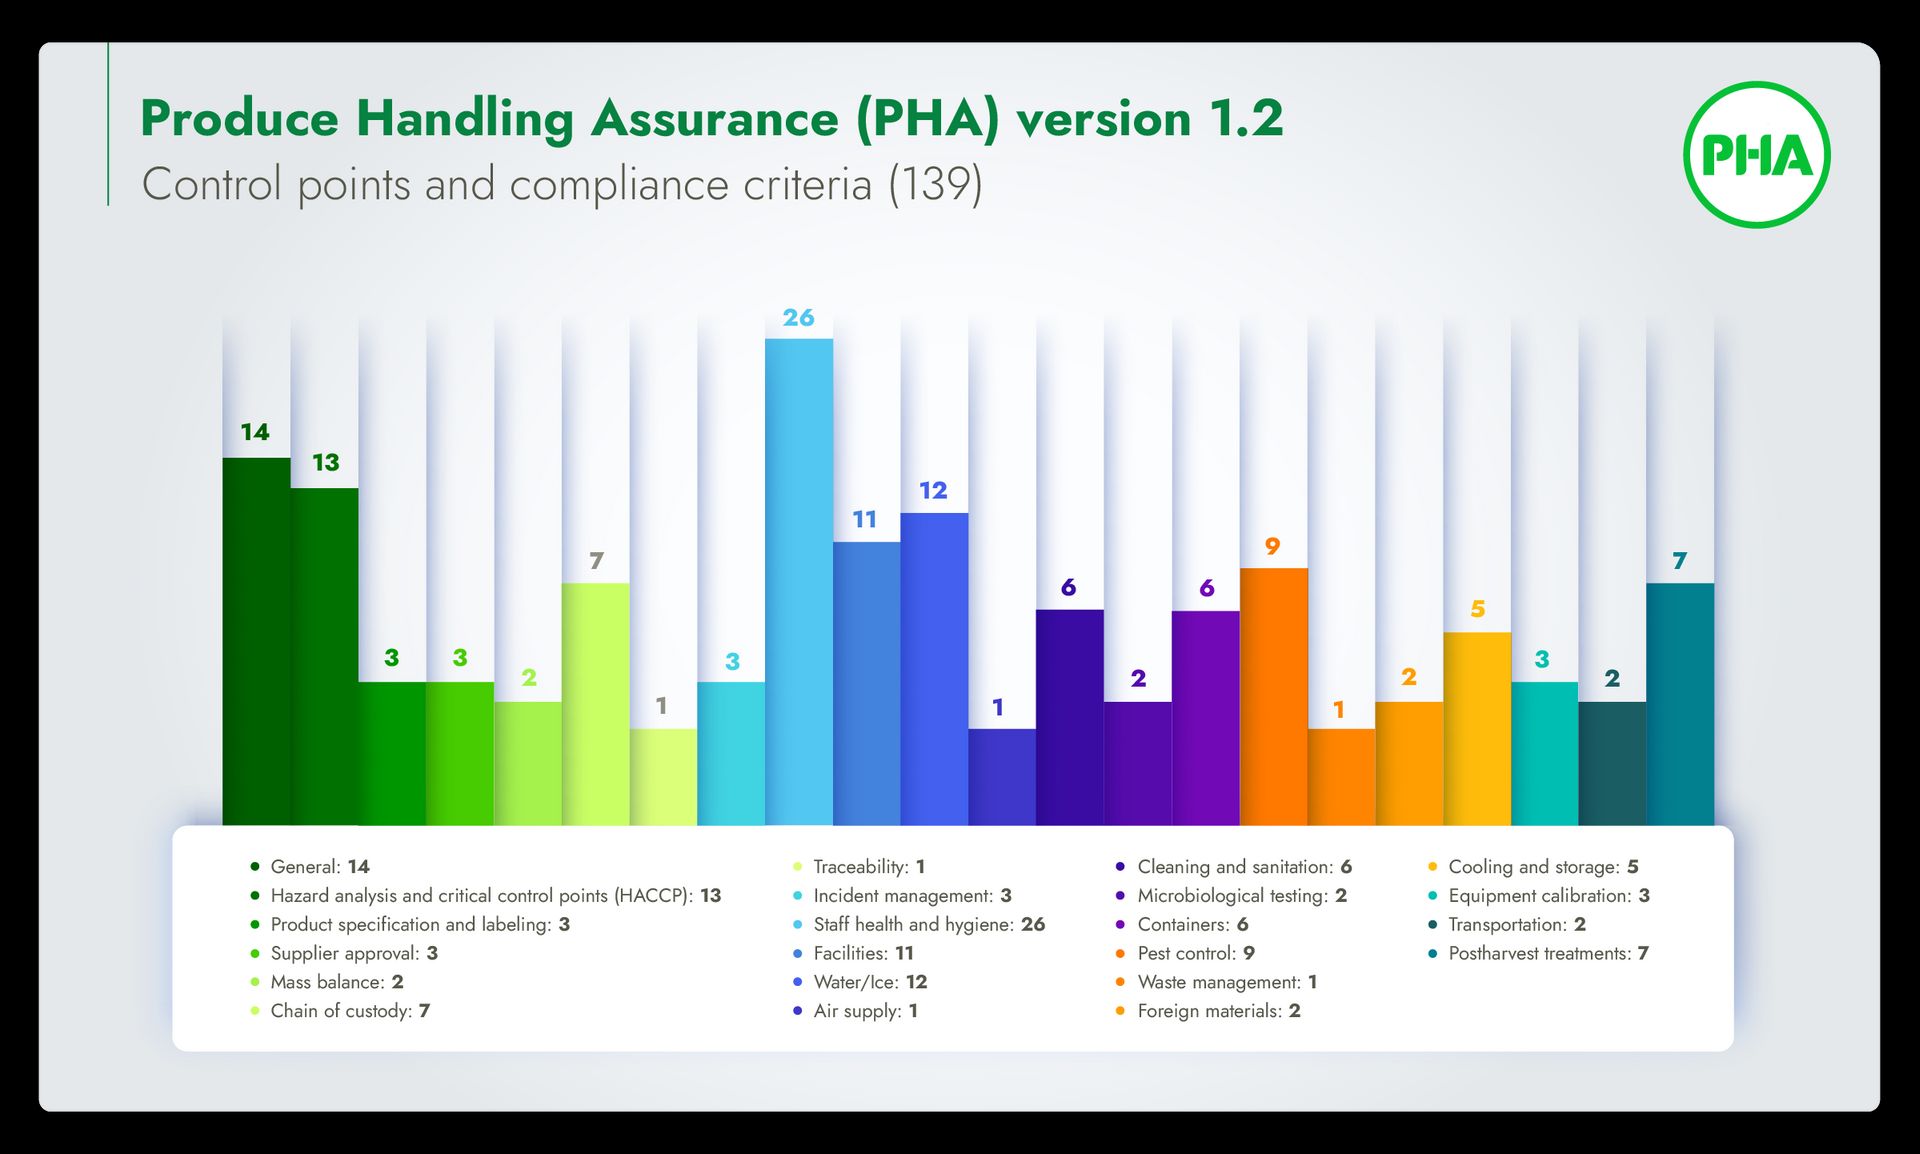 Infographic showing the control points and compliance criteria of Produce Handling Assurance version 1.2